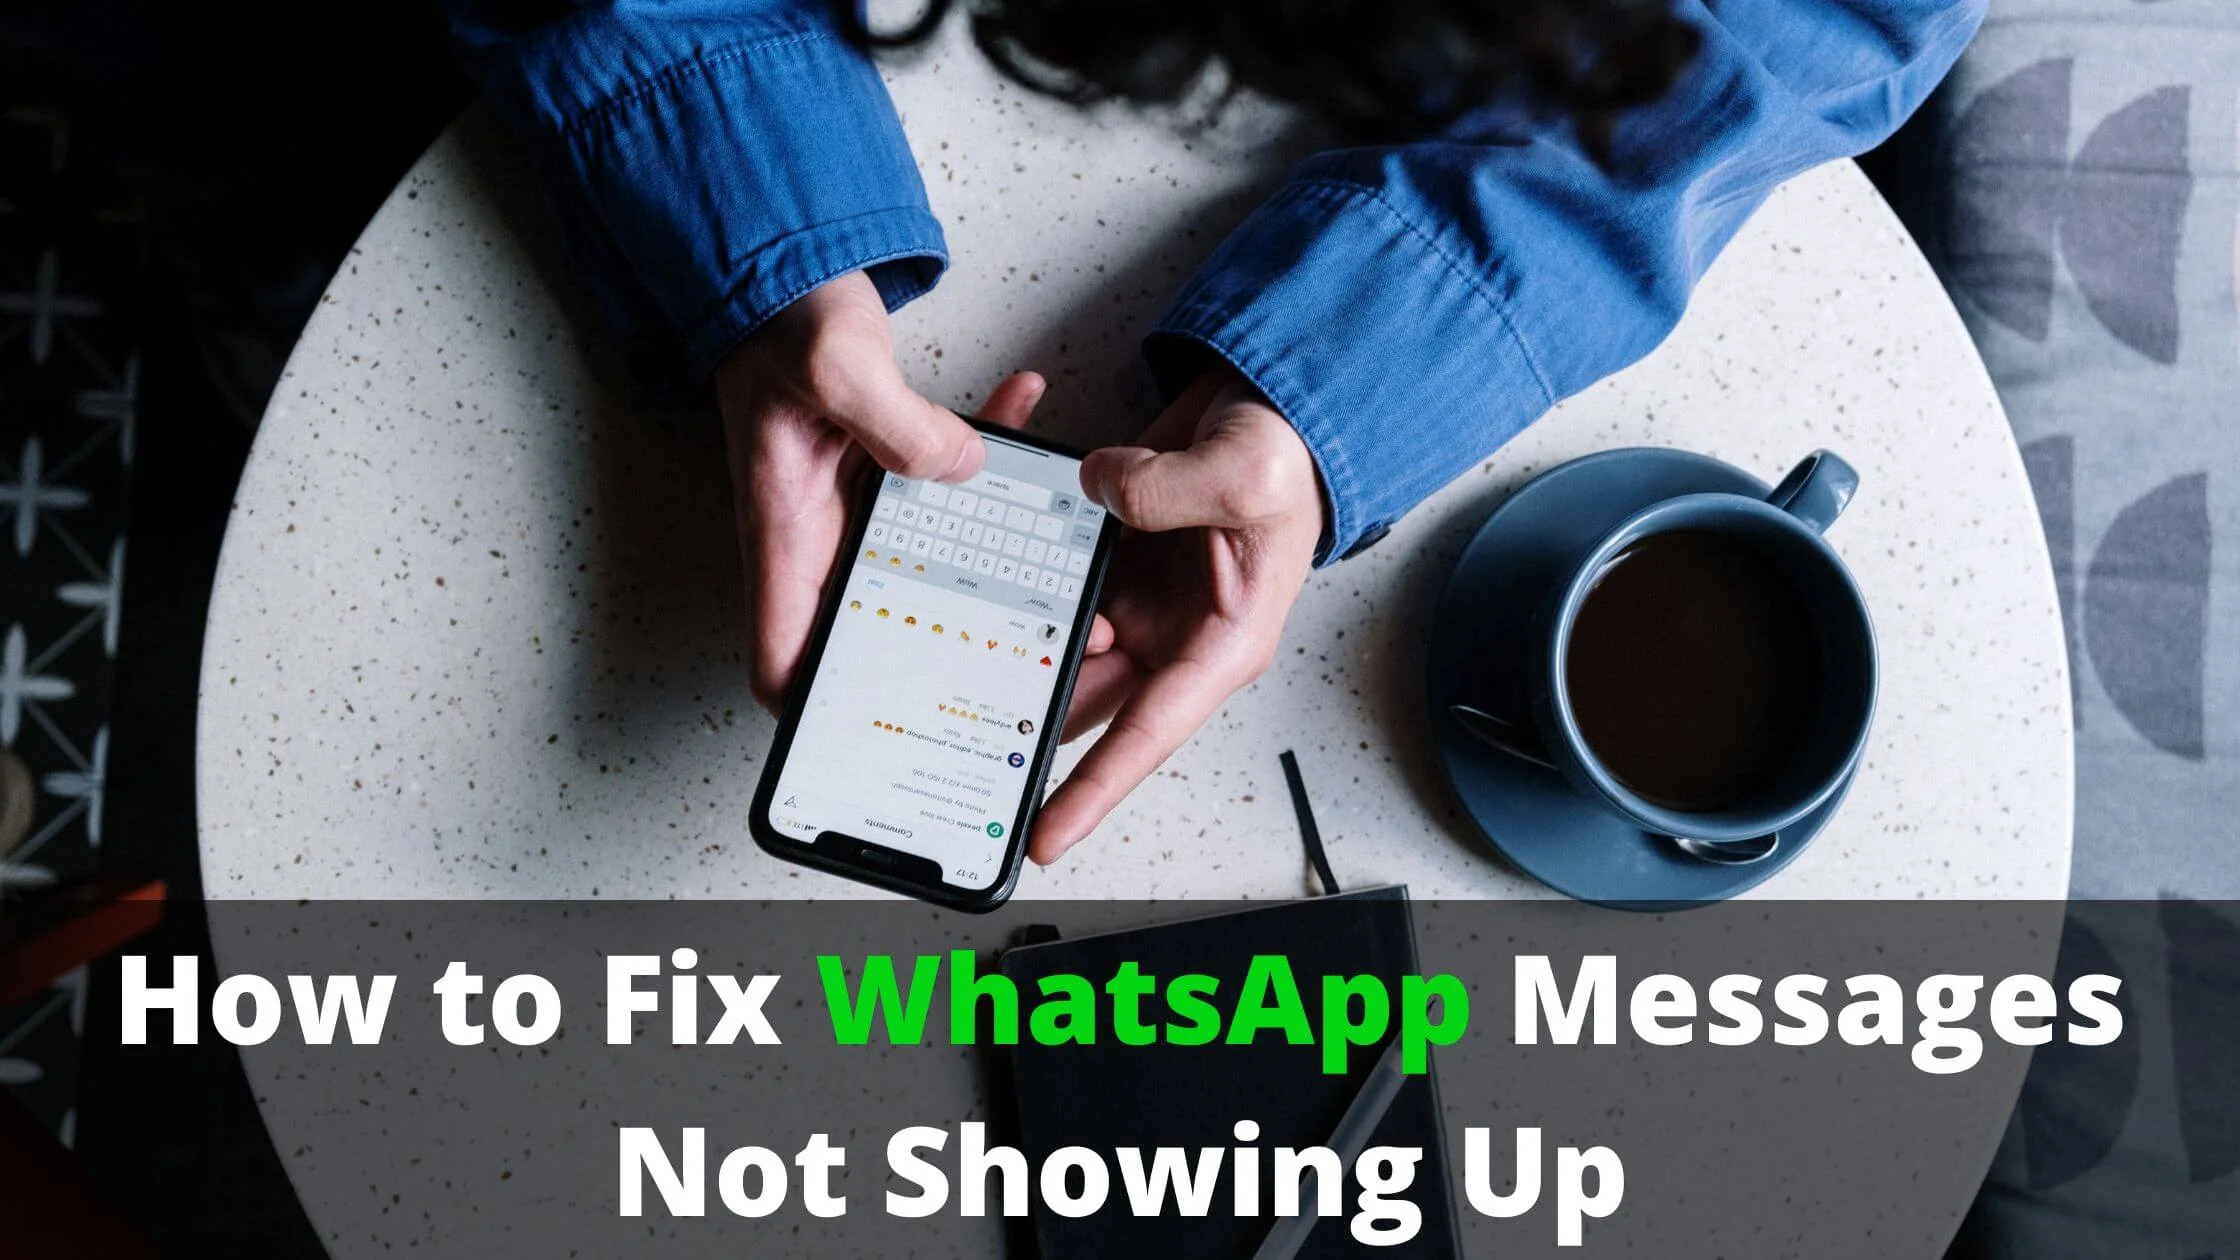 WhatsApp Messages Not Showing Up